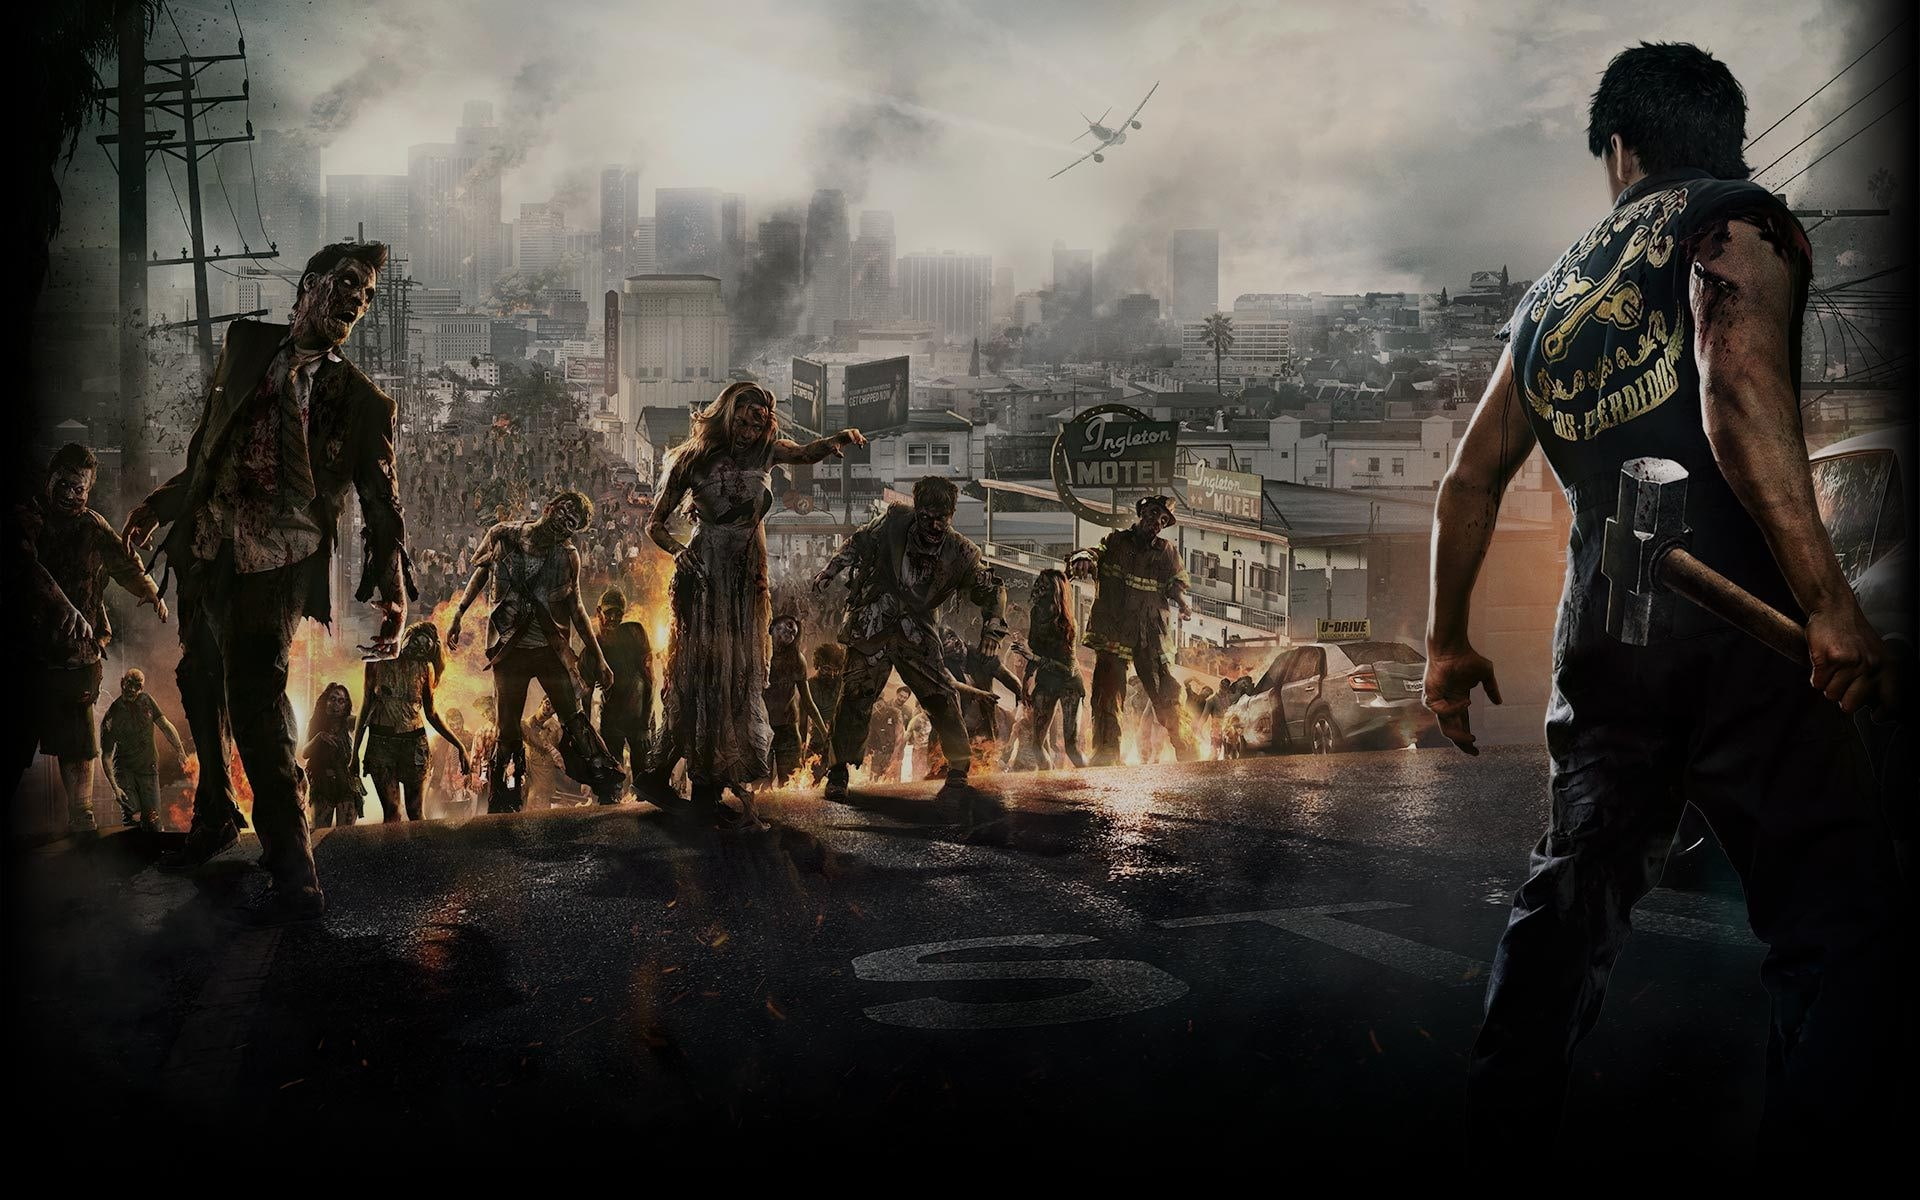 dead rising 3, architecture, city, group of people, men, adult